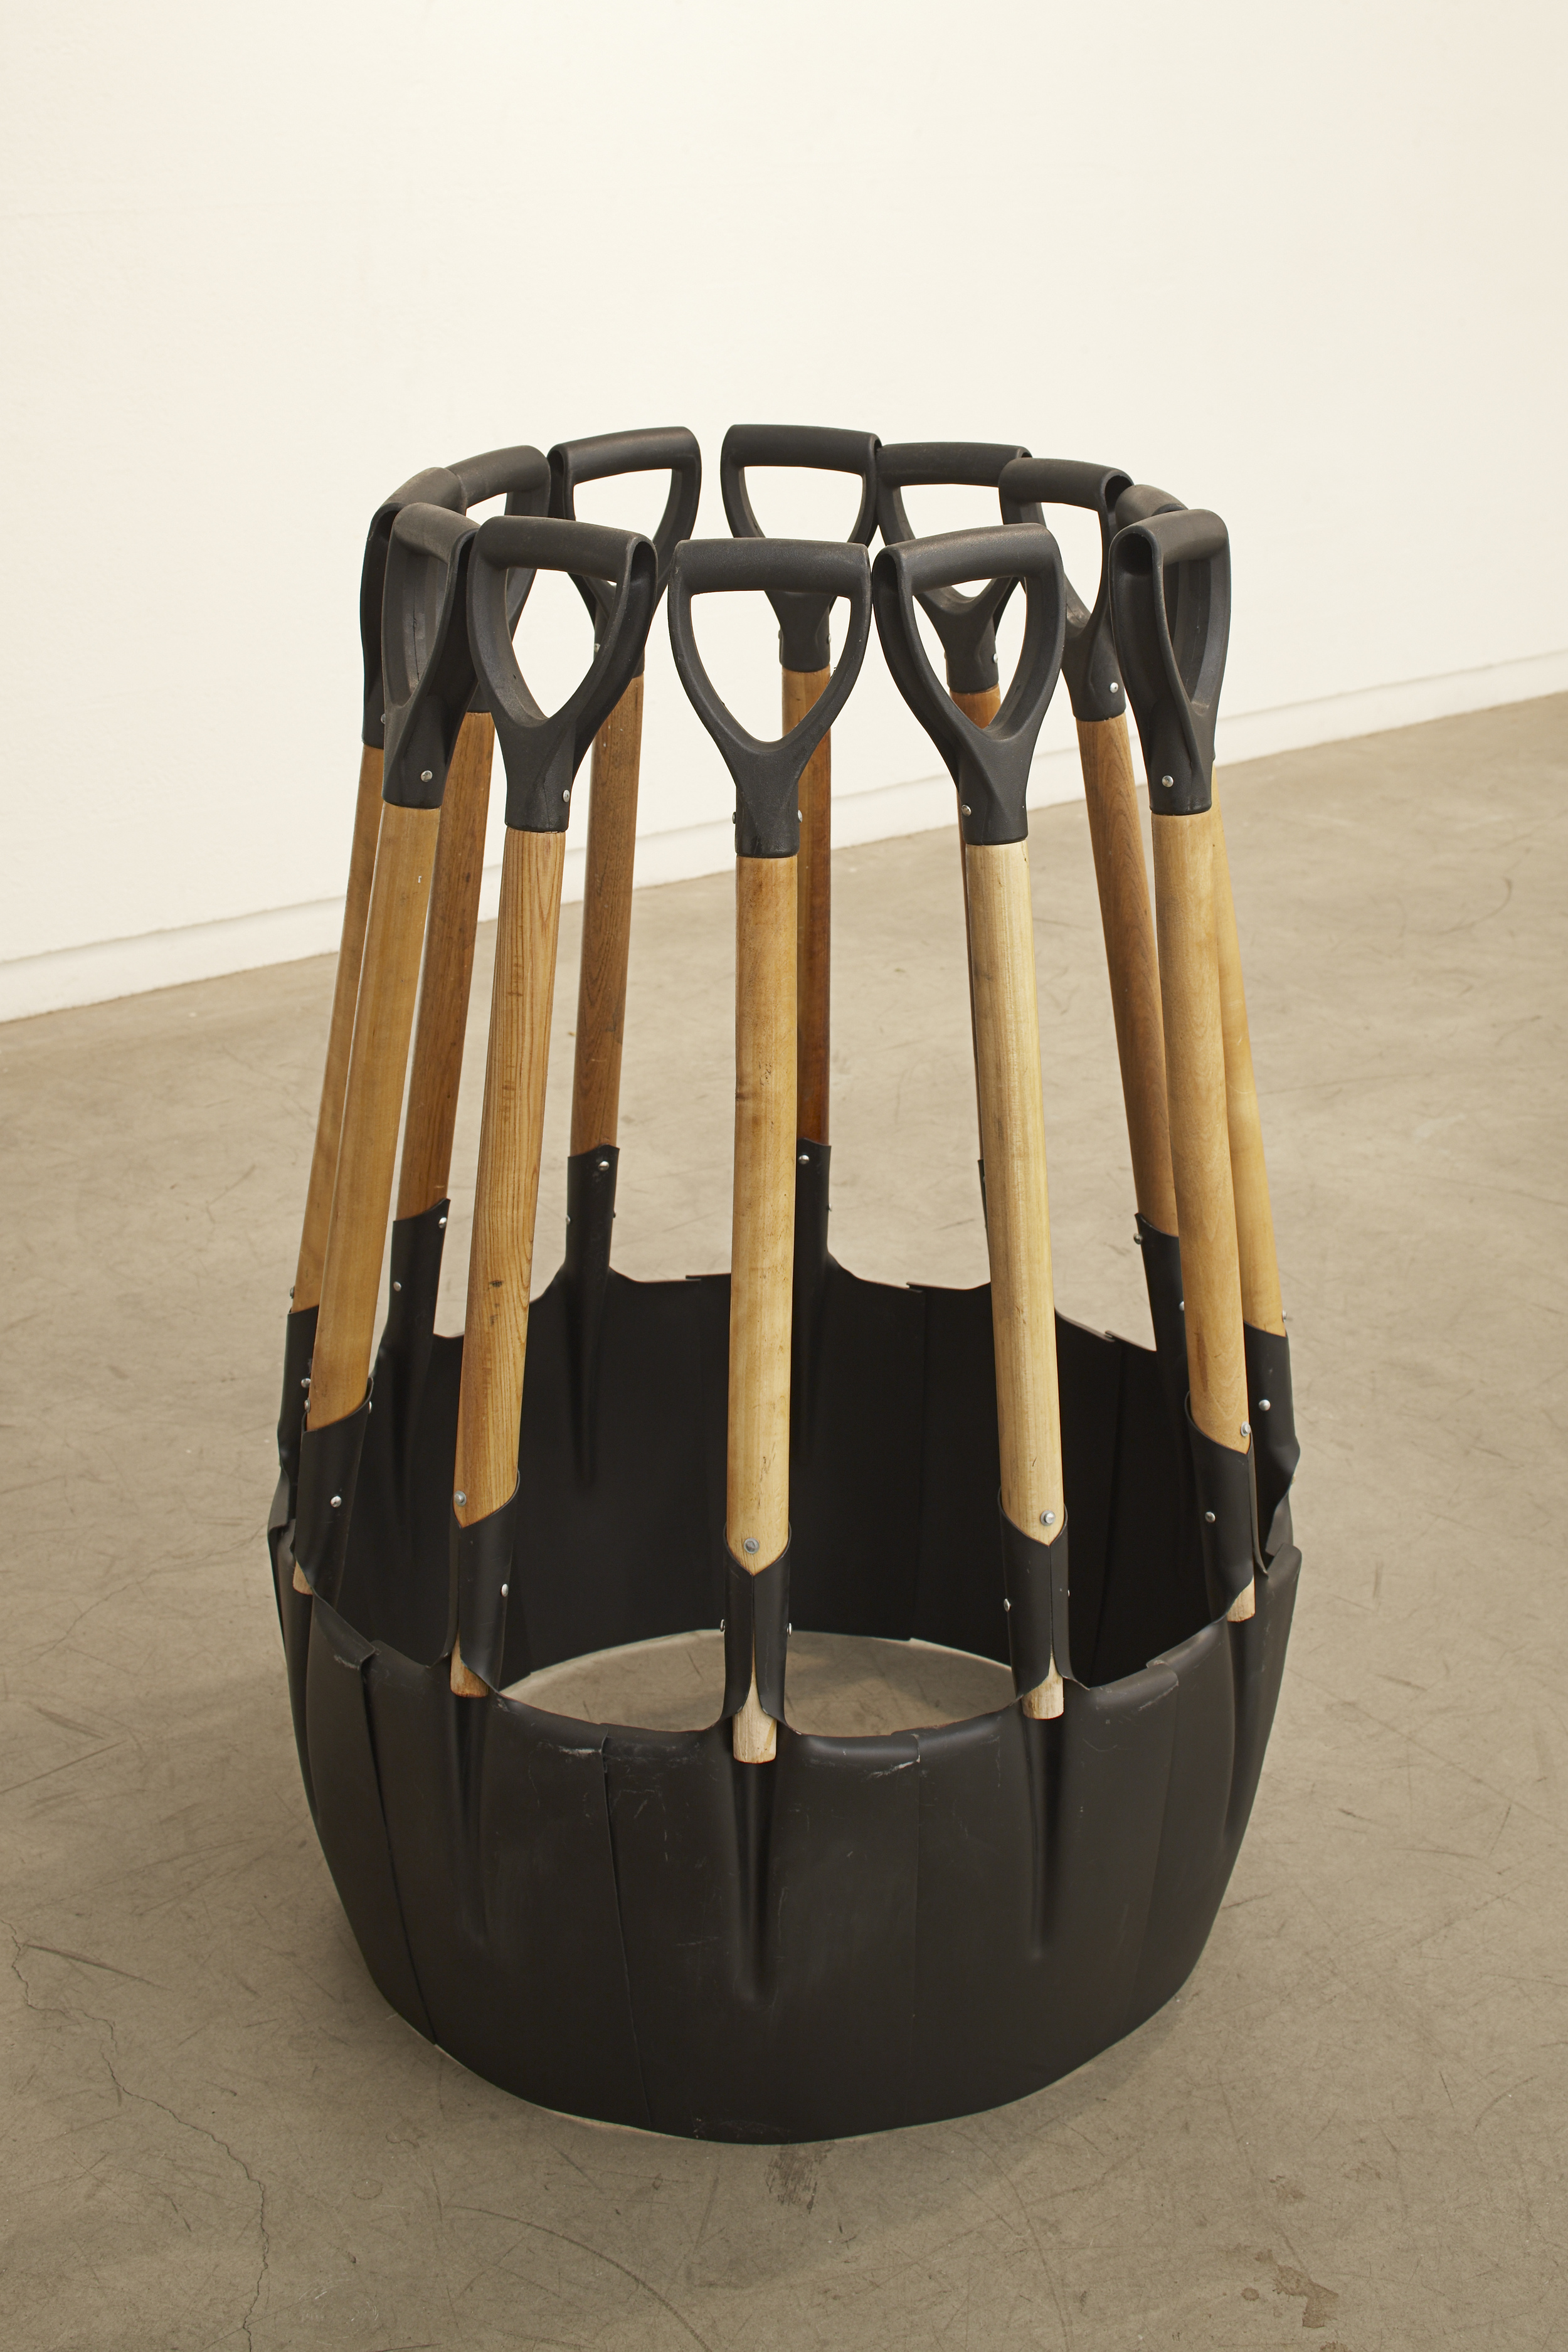  In Advance of the Broken Army, 2009 Steel, Wood 102 x 73 x 72 cm 